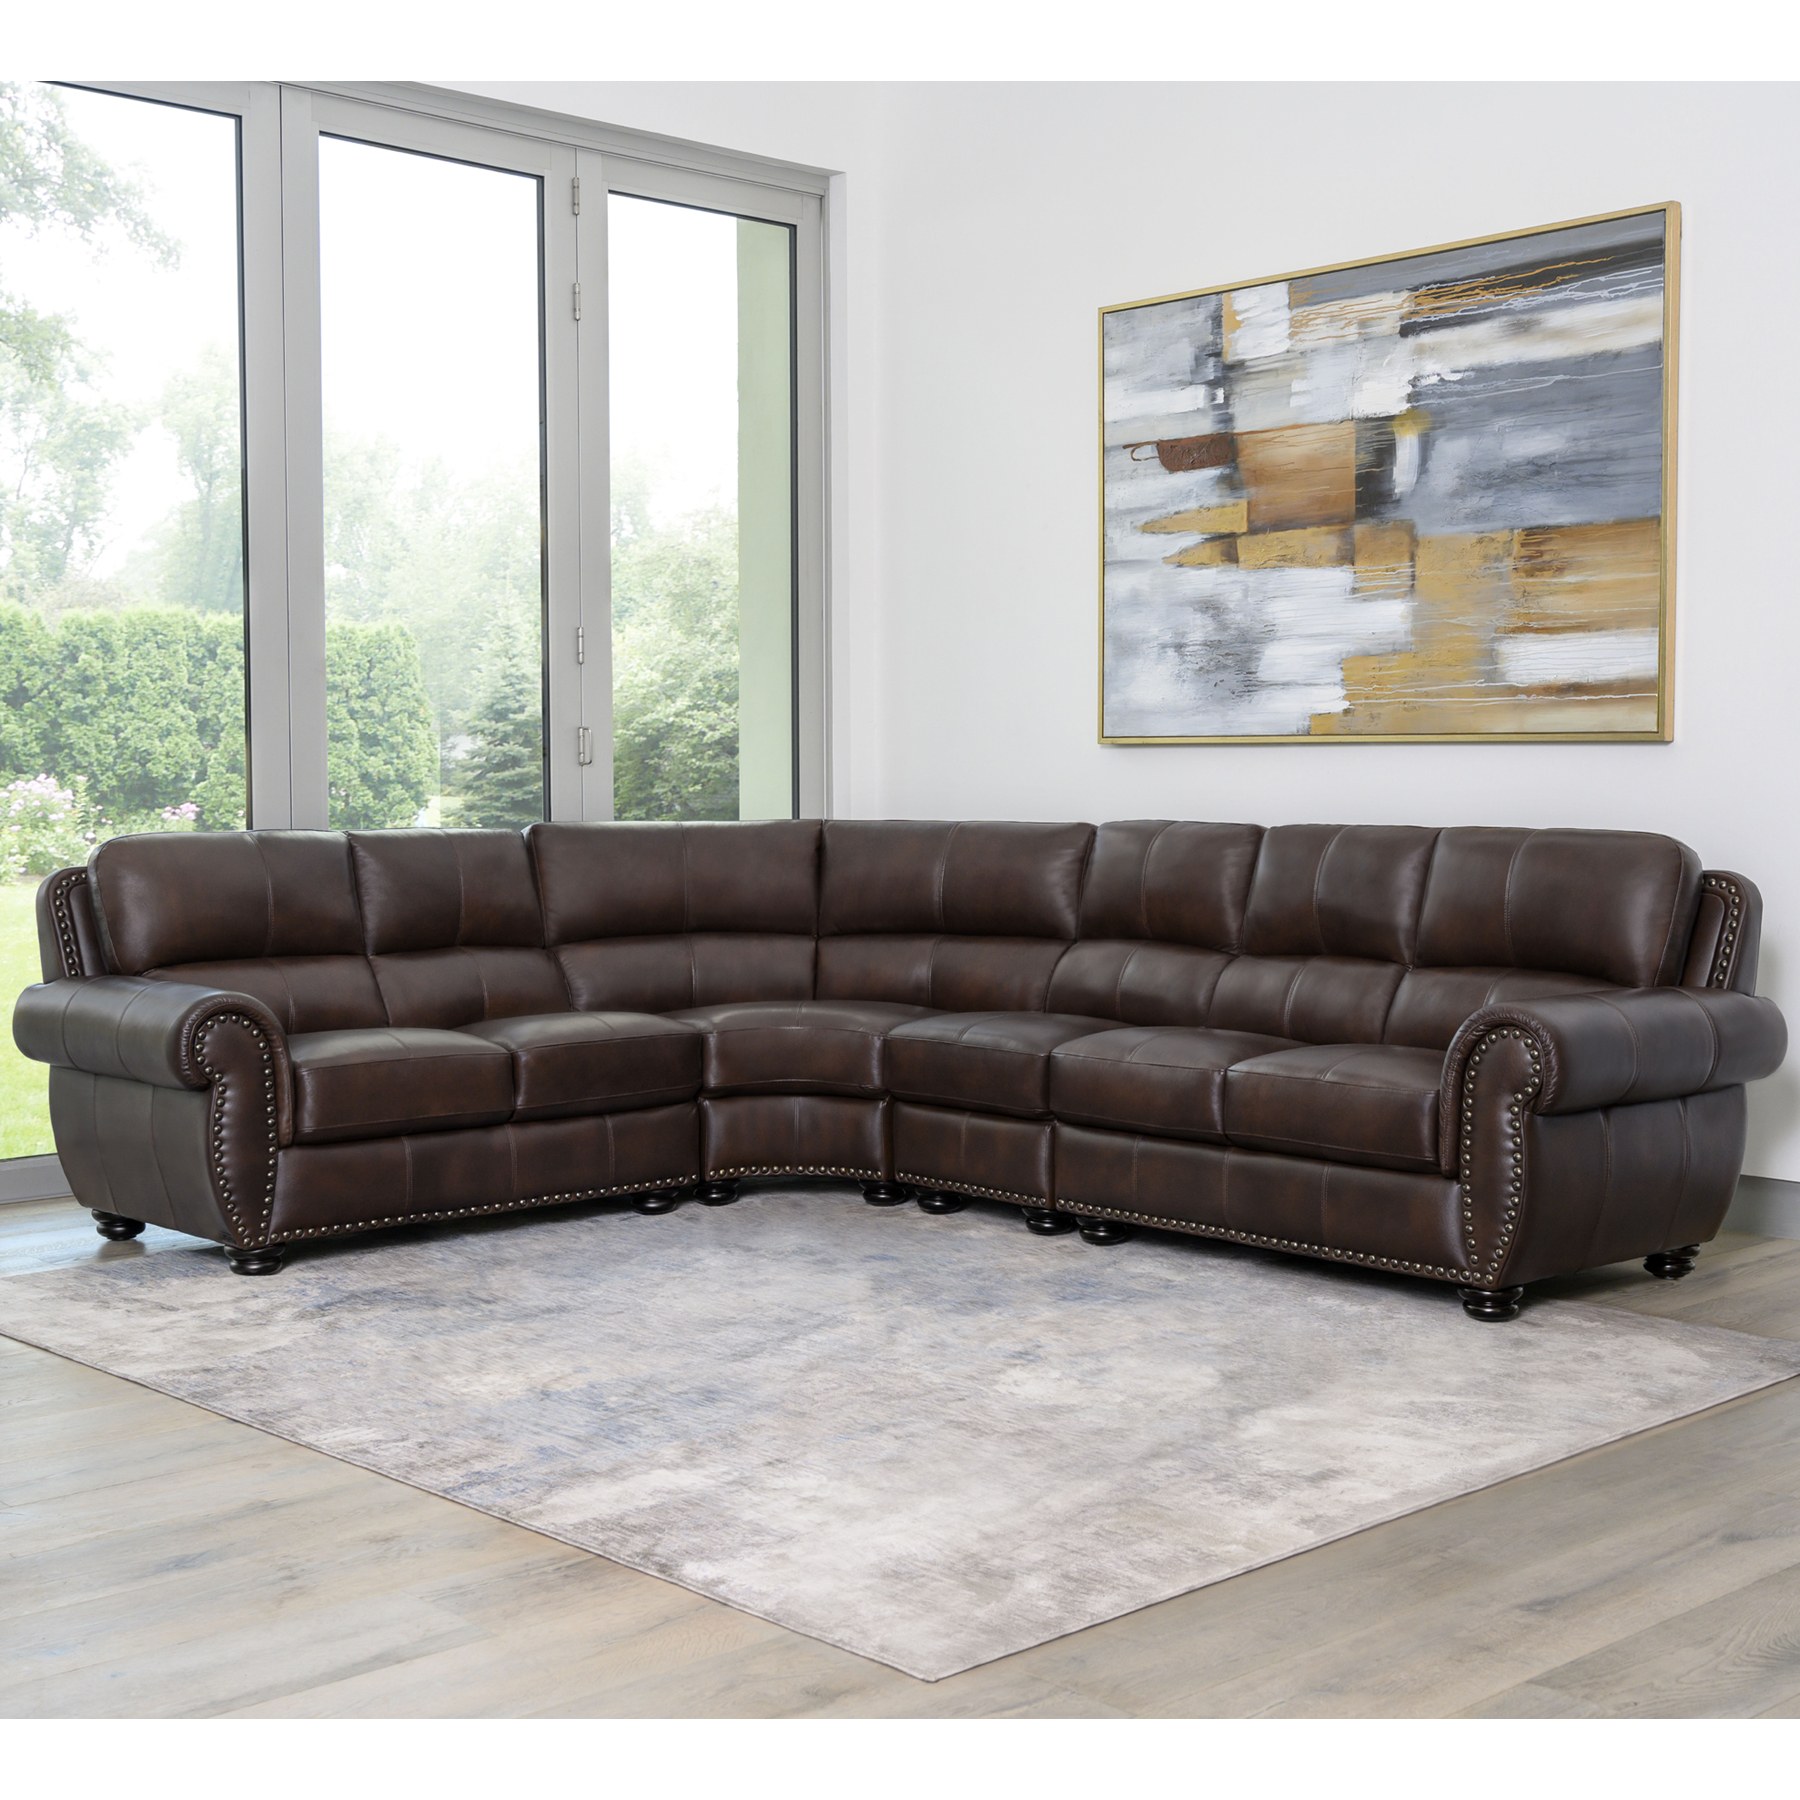 Austin Top Grain Leather Sectional With, Leather Sectional Sofa Costco